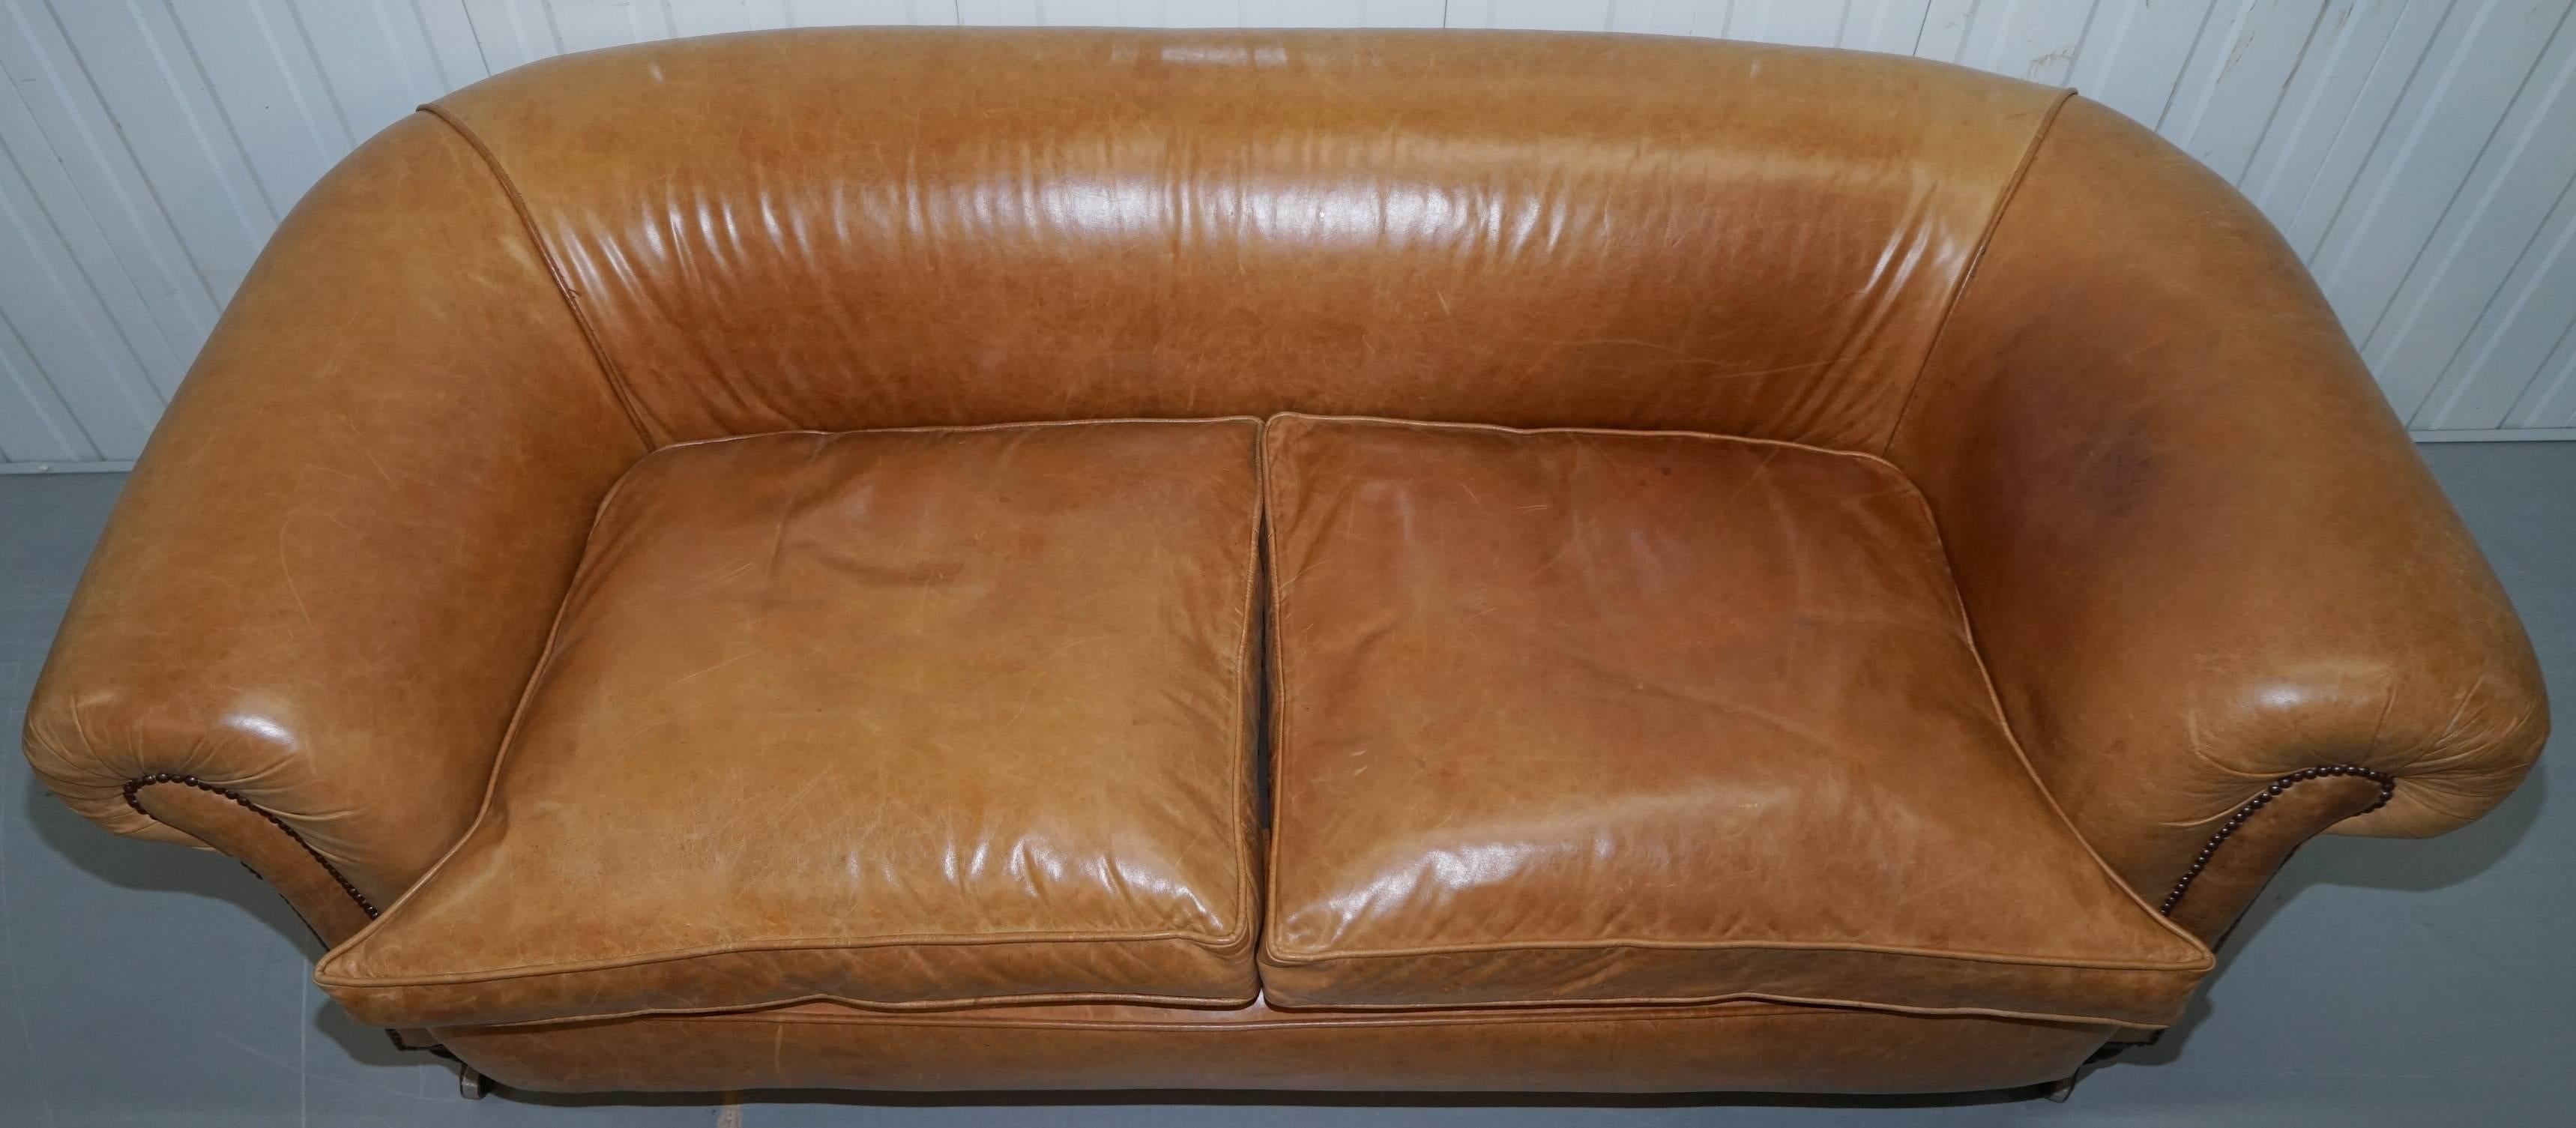 Hand-Carved 1 of 2 Victorian Brown Leather Sofas Stamped Back Leg Coil Sprung Feather Filled